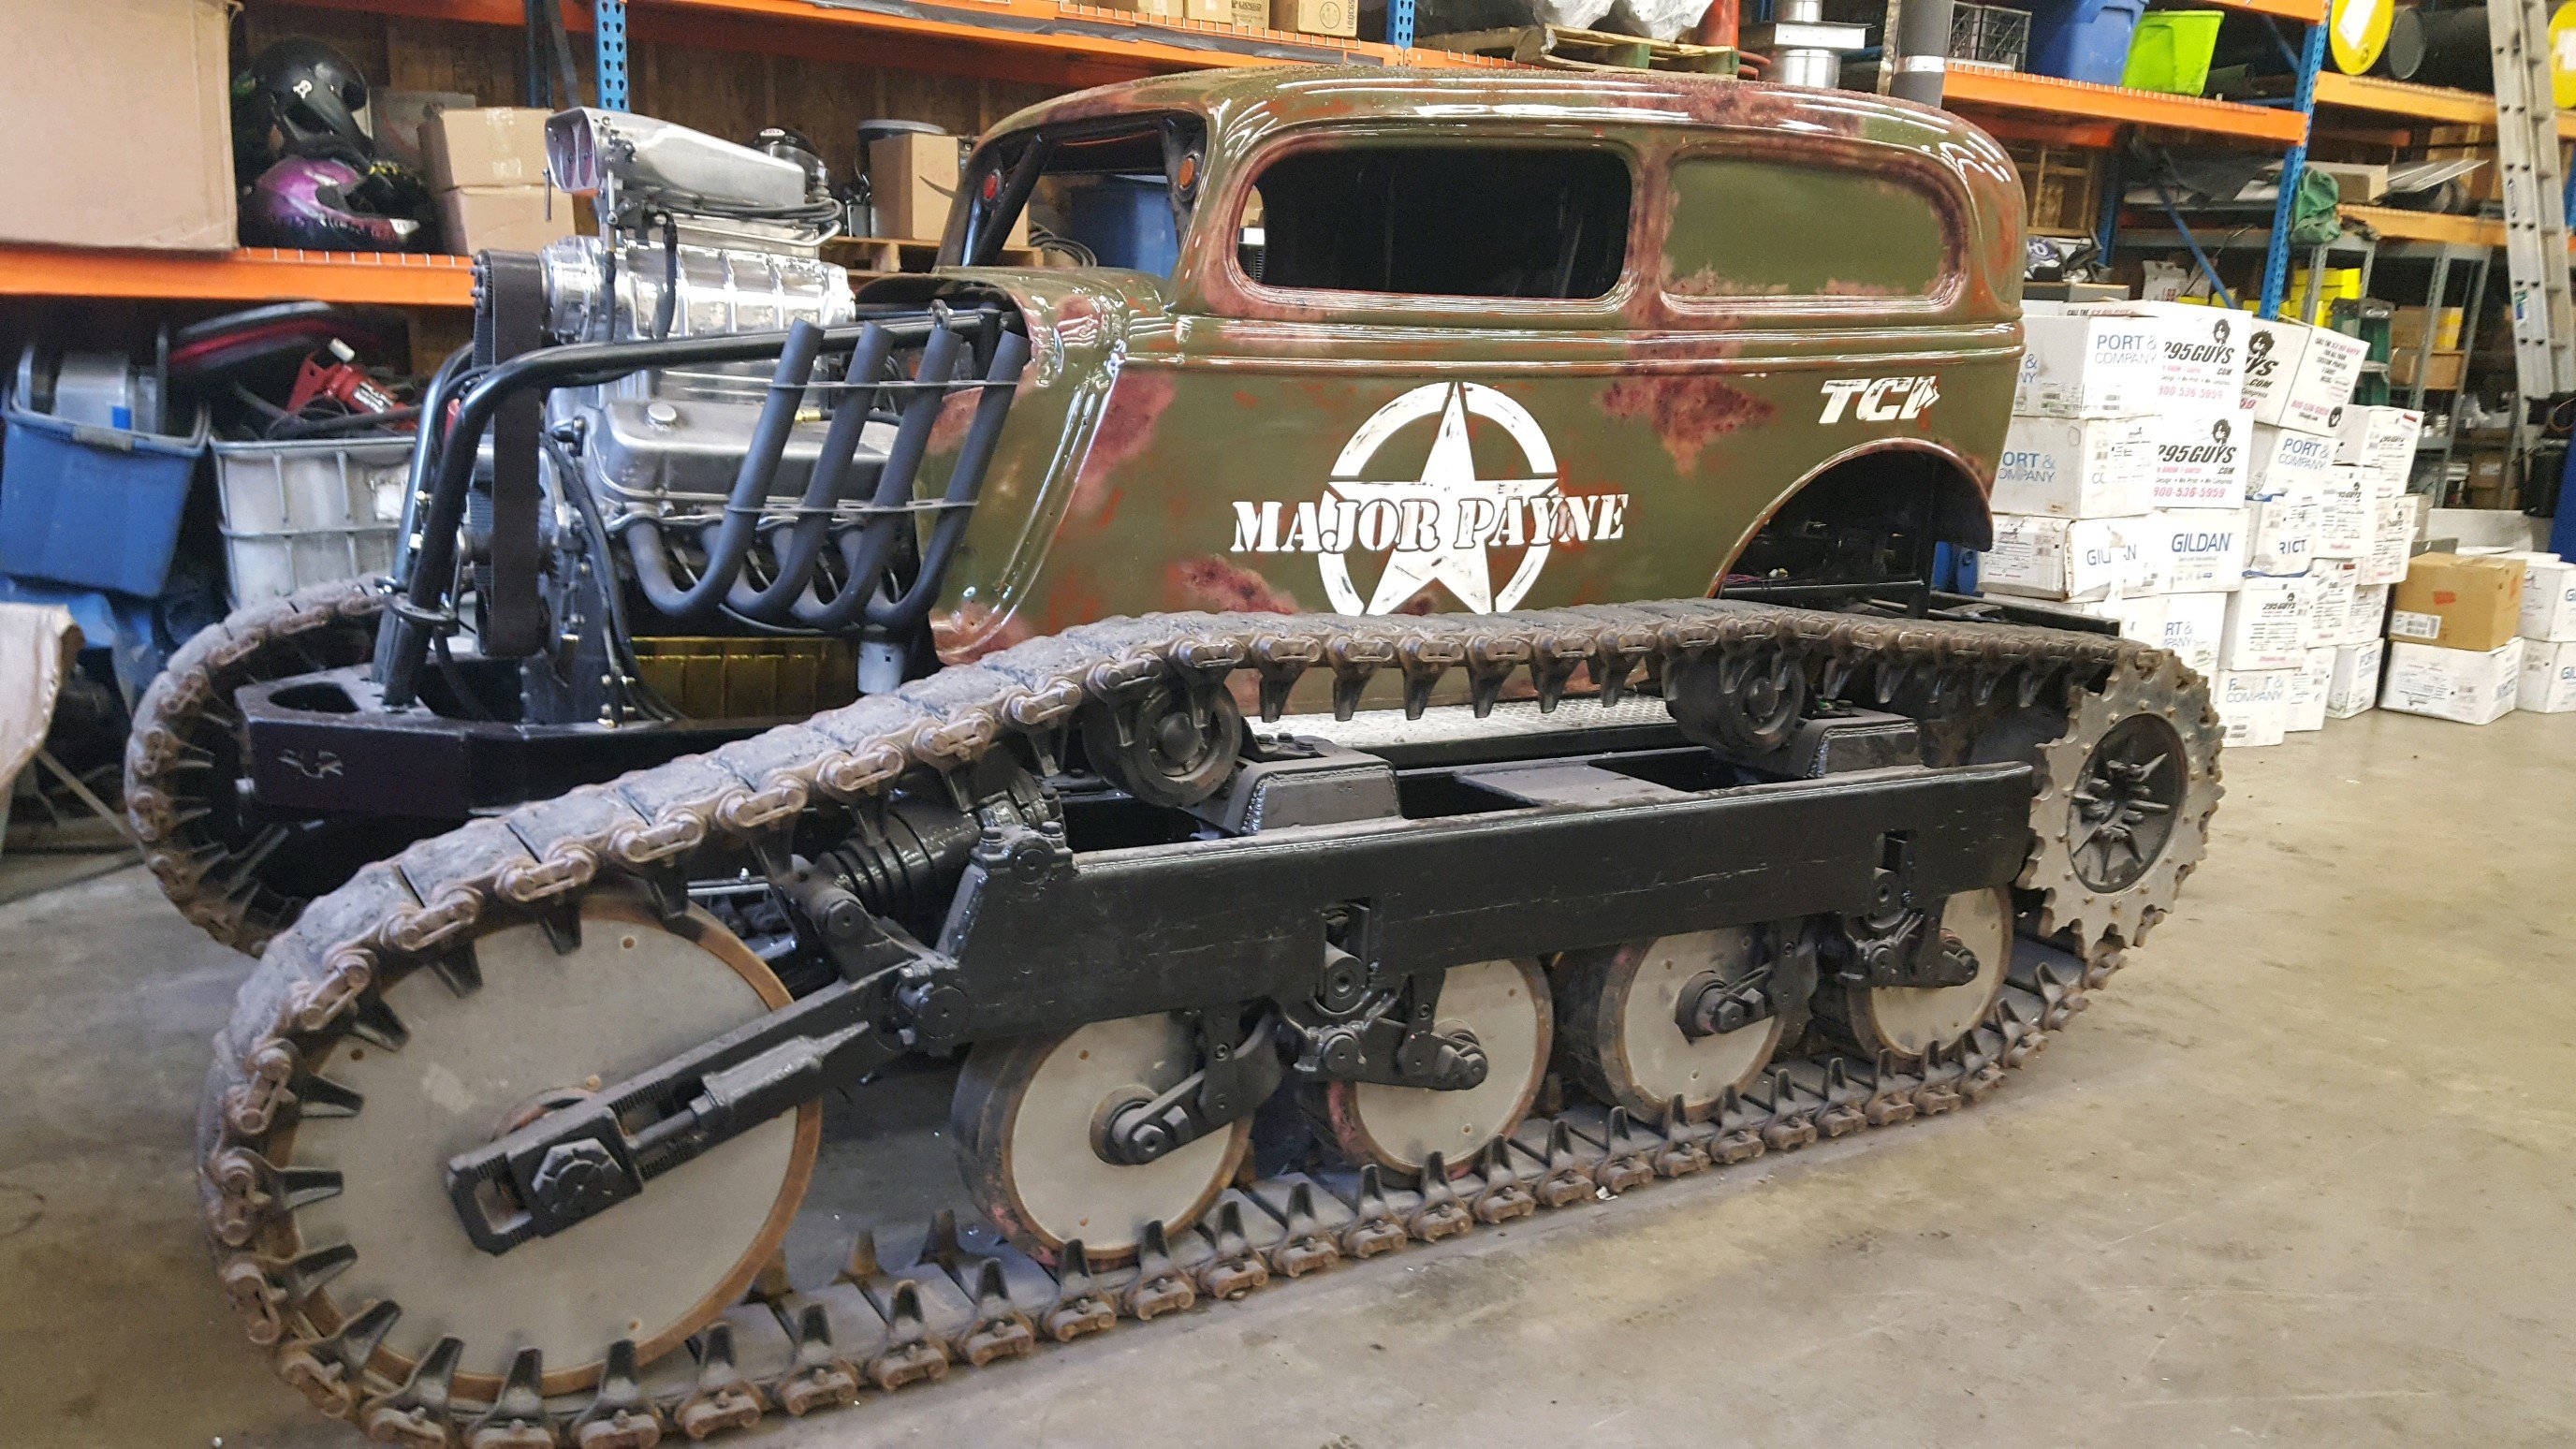 It's a Bird...It's a Plane...It's a Blown-Alcohol Hot Rod on a Tank Chassis!